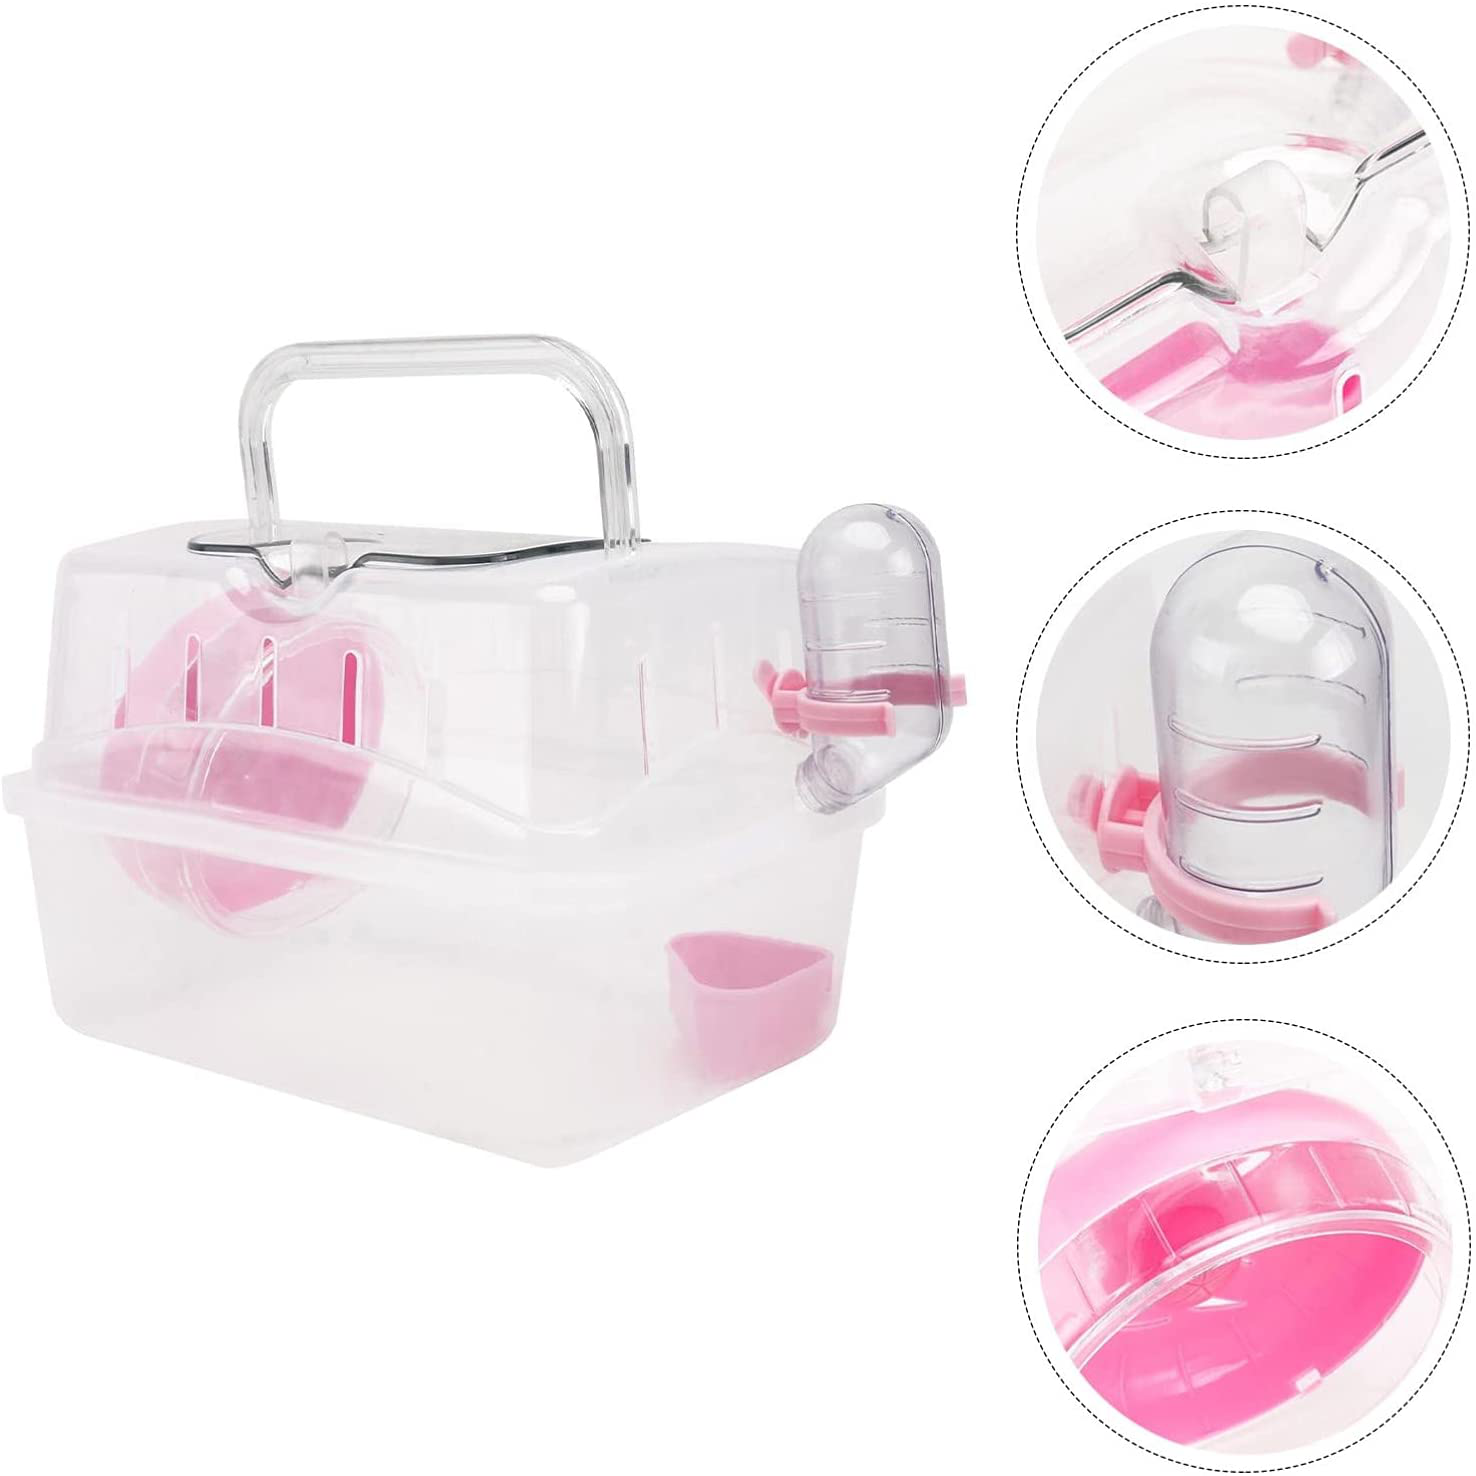 TEHAUX Dwarf Hamster Travel Cage Habitat, Small Animal Portable Travel Carrier with Accessories Including Exercise Wheel Water Bottle and Food Dish （ Pink ）